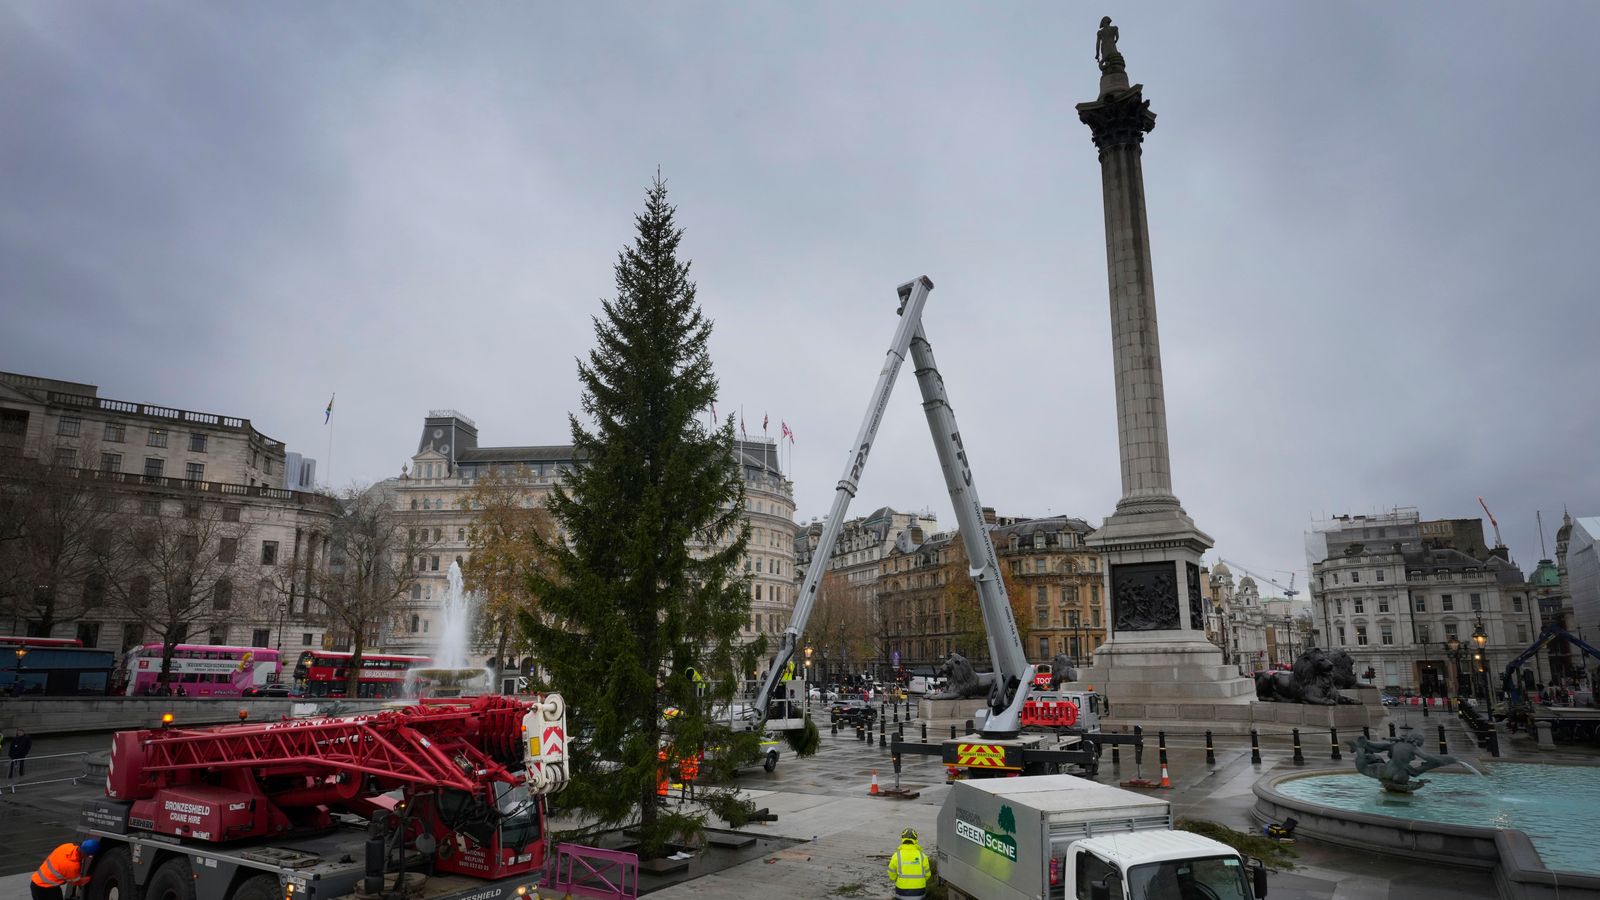 Trafalgar Square Christmas tree: Annual gift to London from Norway mocked by onlookers as 'half dead'